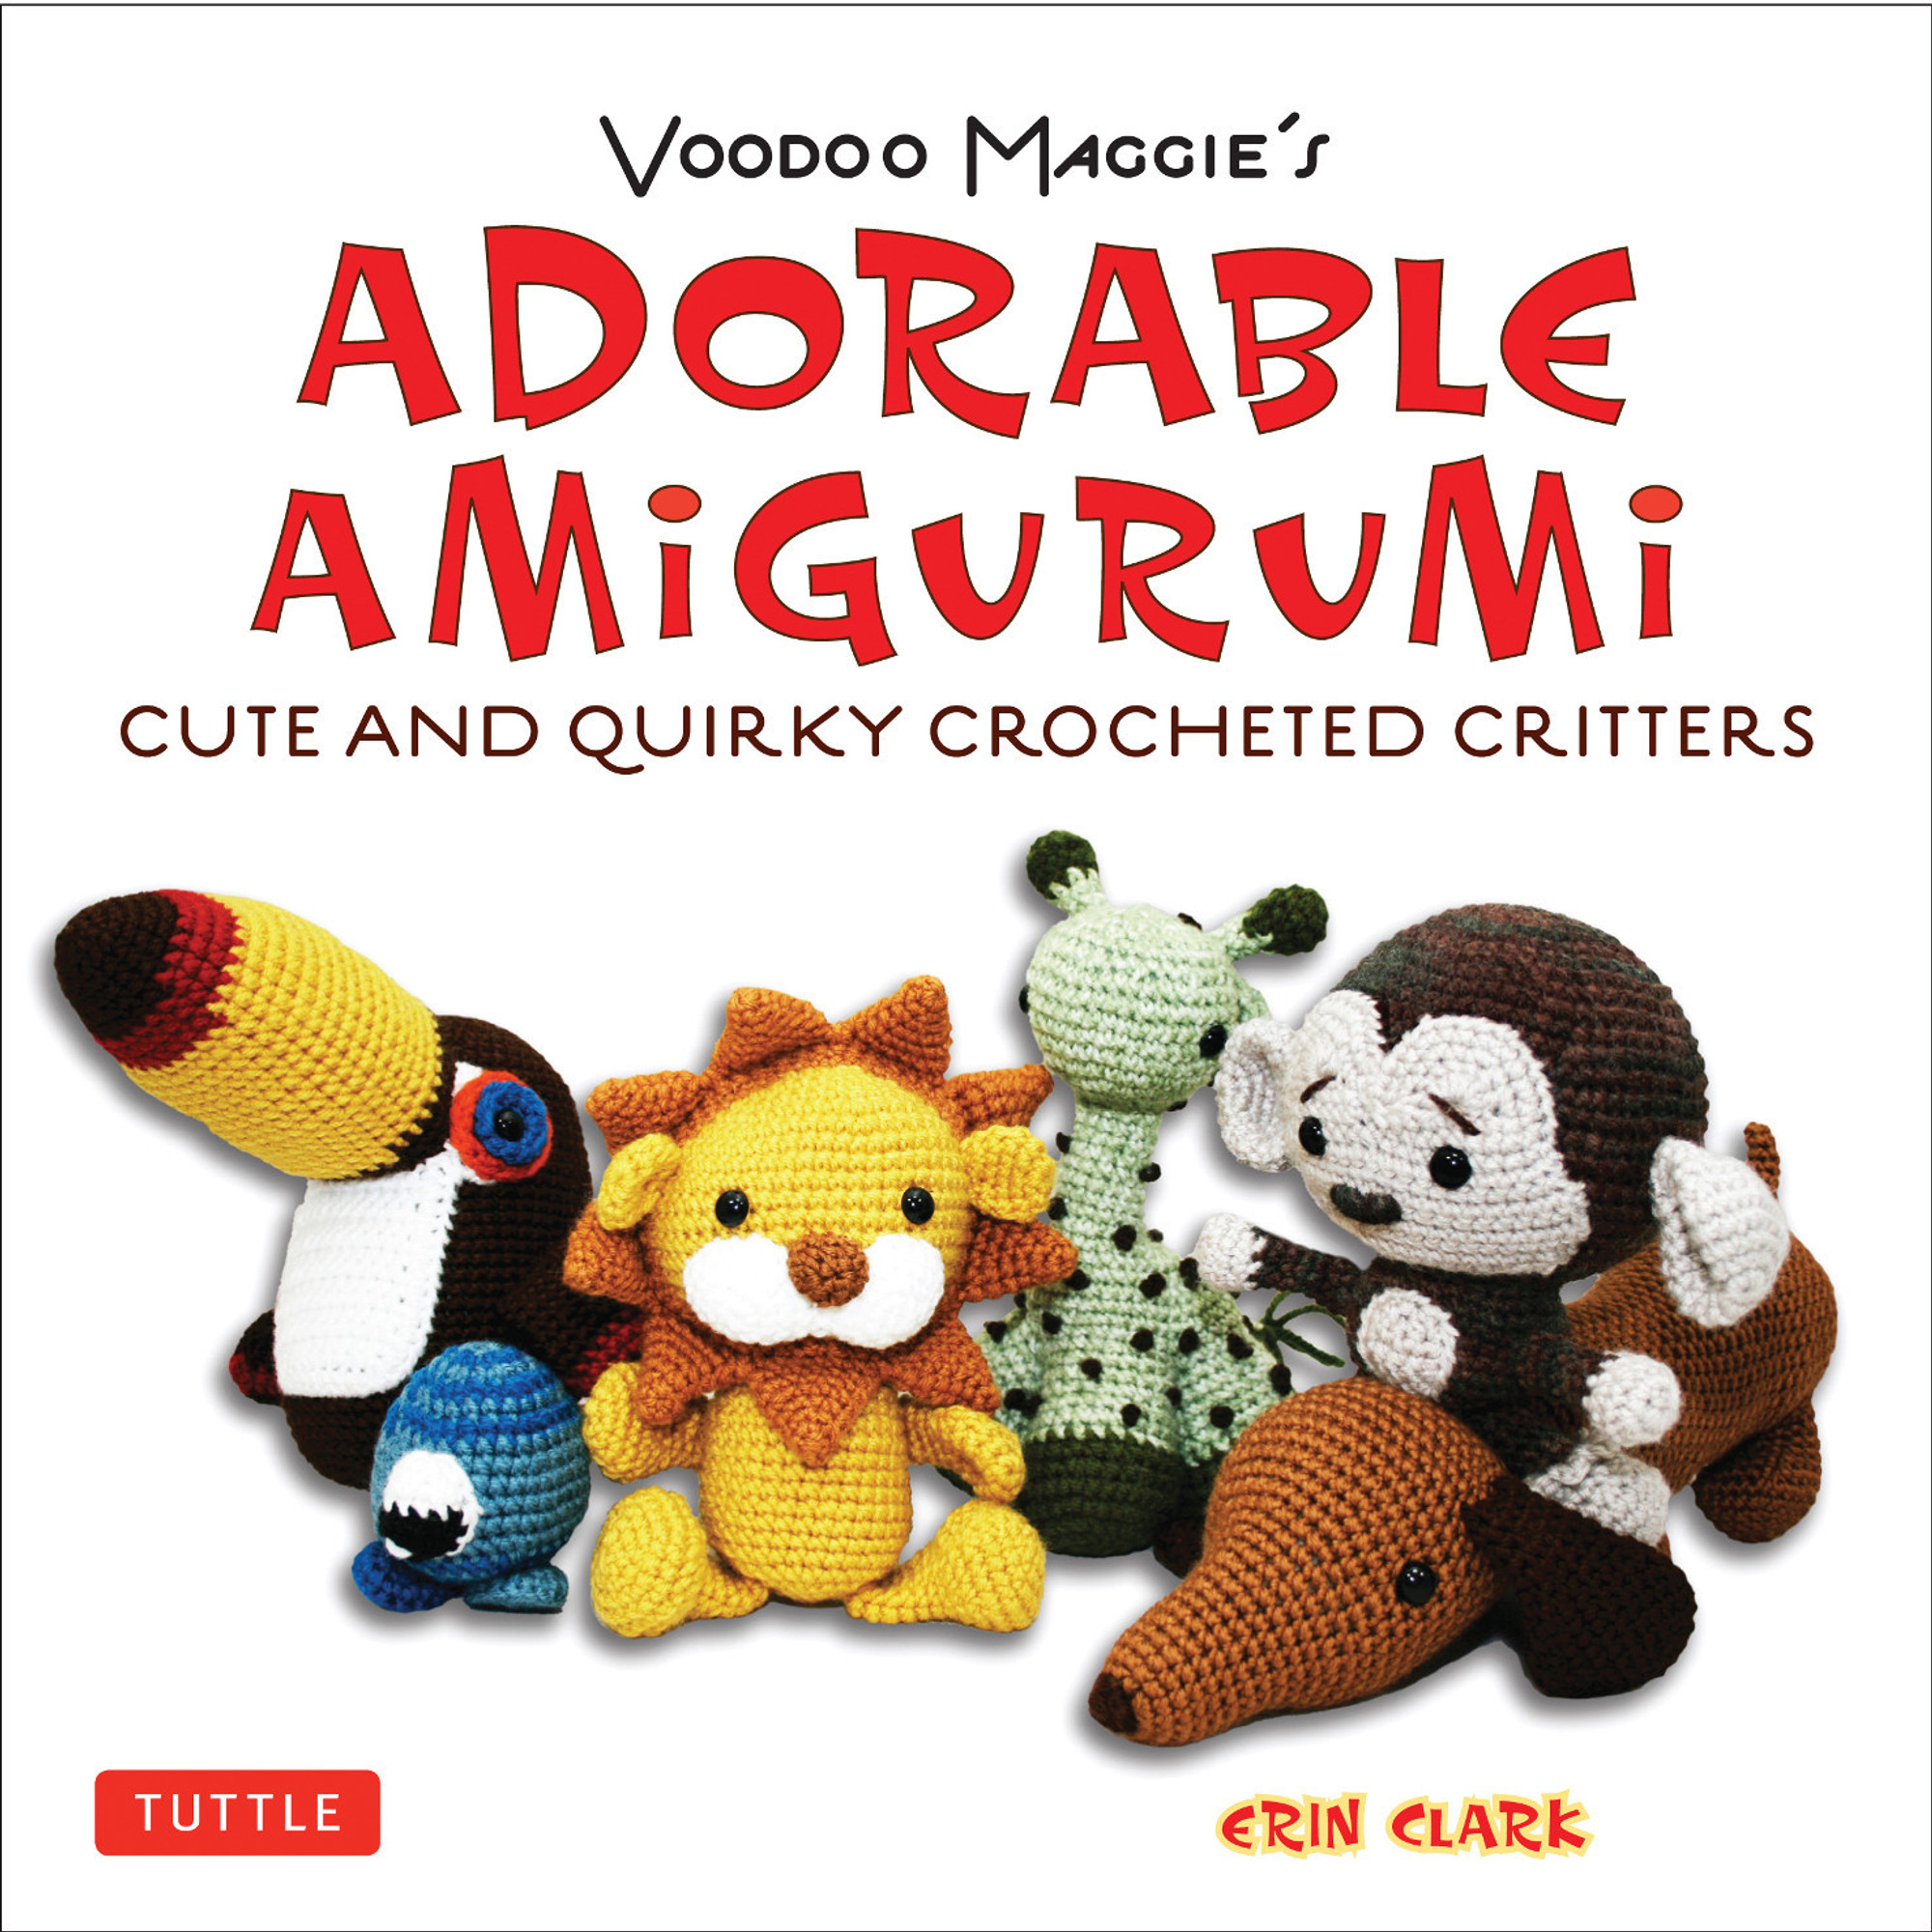 Adorable Amigurumi - Cute and Quirky Crocheted Critters ...